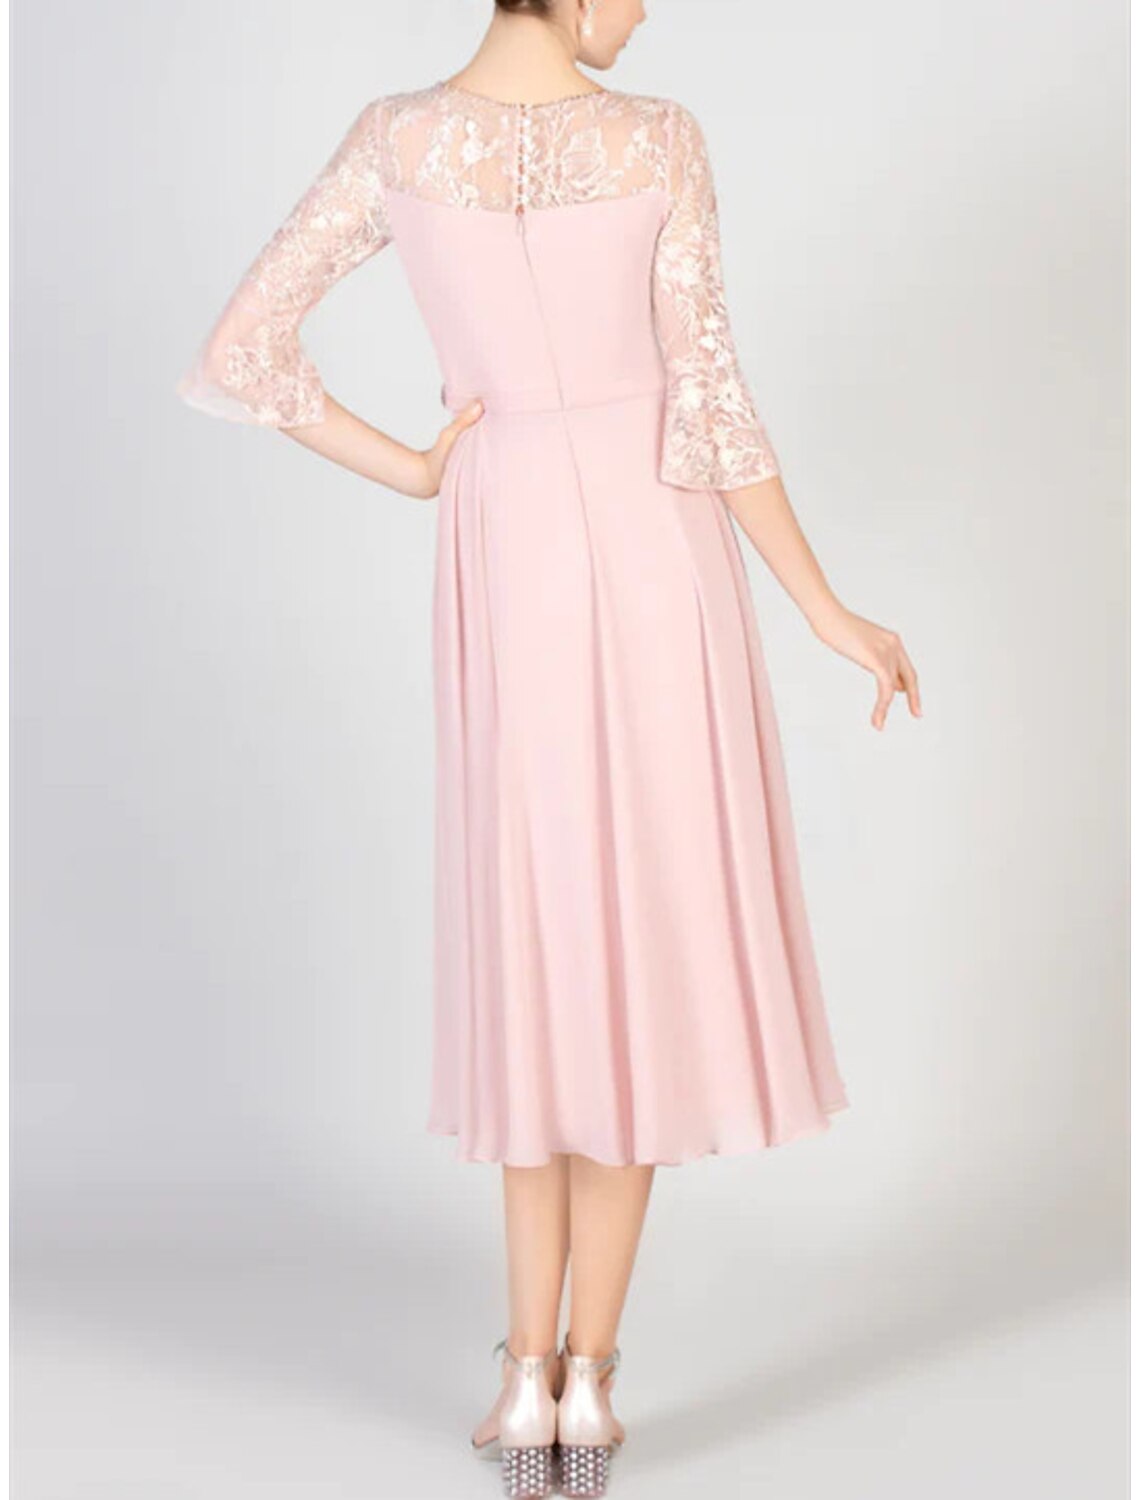 A-Line Mother of the Bride Dress Formal Wedding Guest Elegant Bateau Neck Scoop Neck Knee Length Chiffon Lace Half Sleeve with Crystals Appliques Solid Color